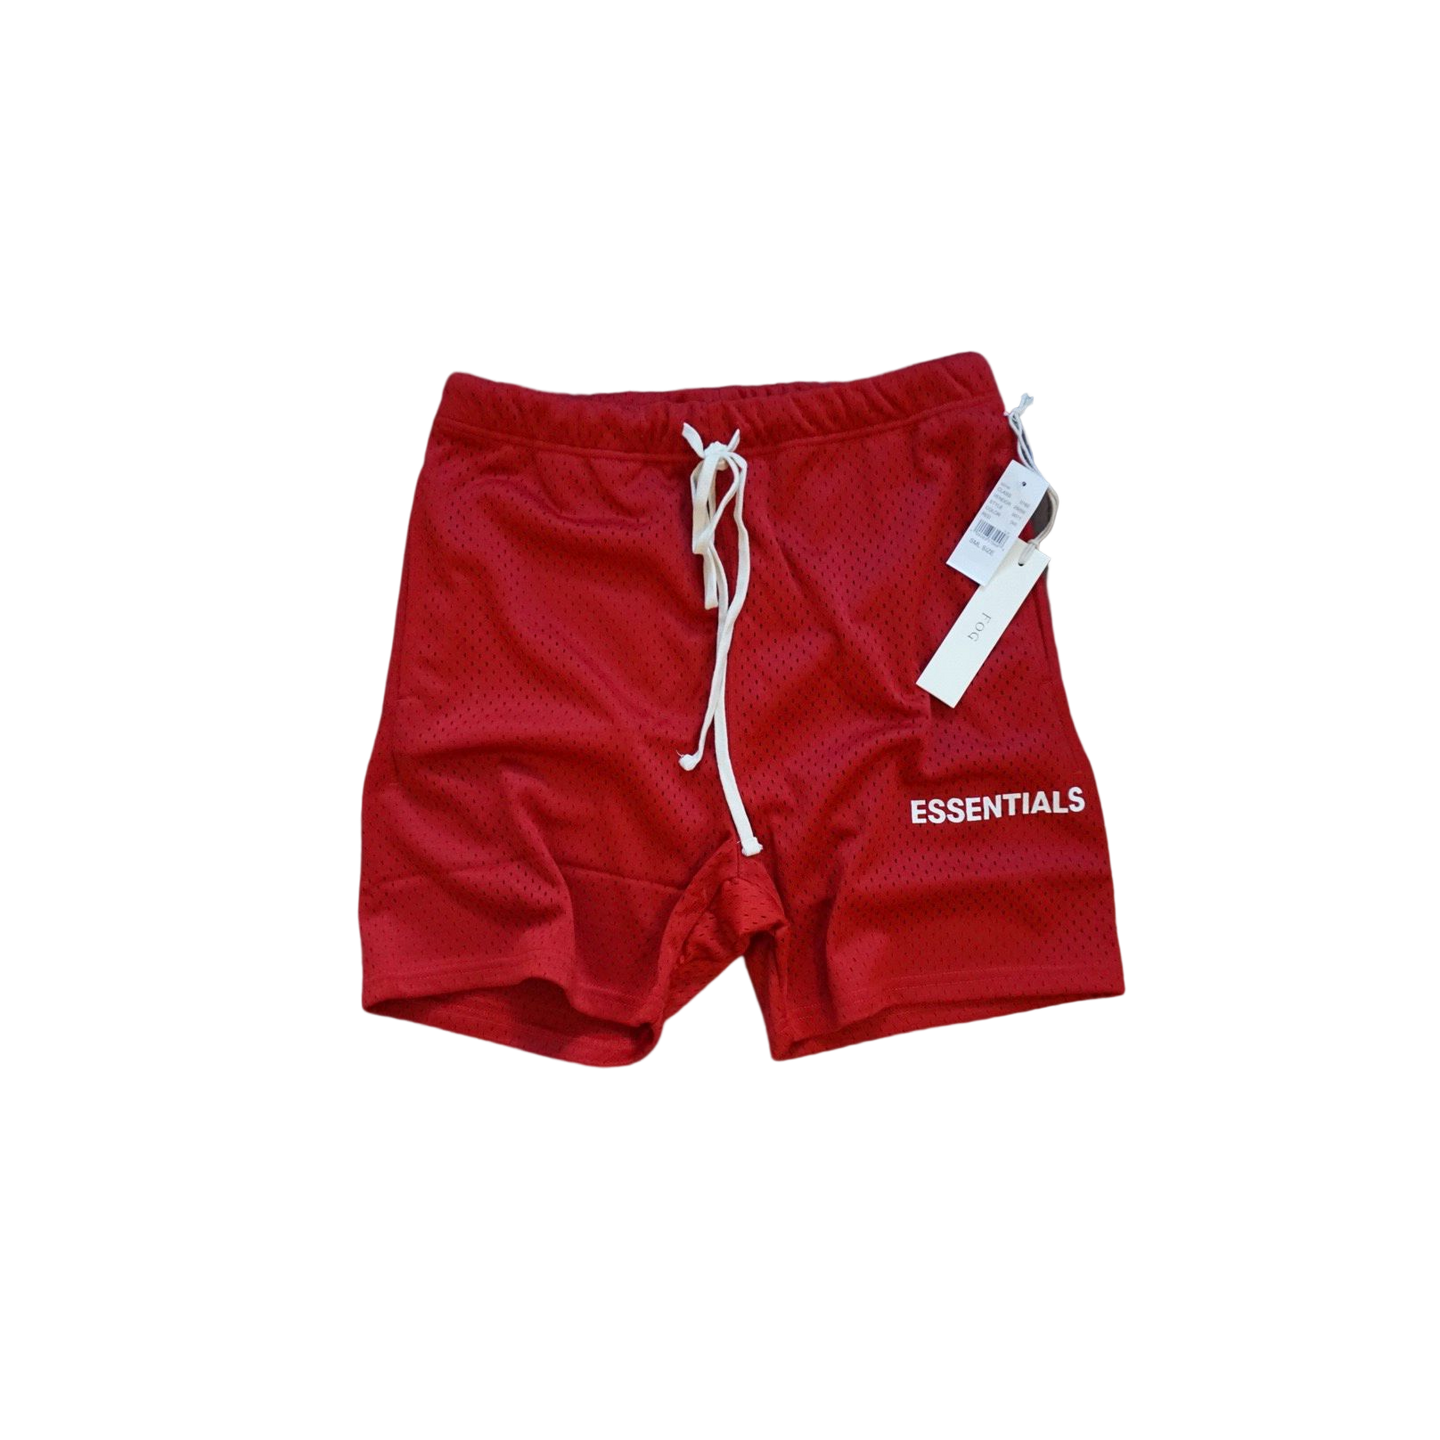 Fear of God Essentials Graphic Mesh Drawstring Shorts - Red - Used